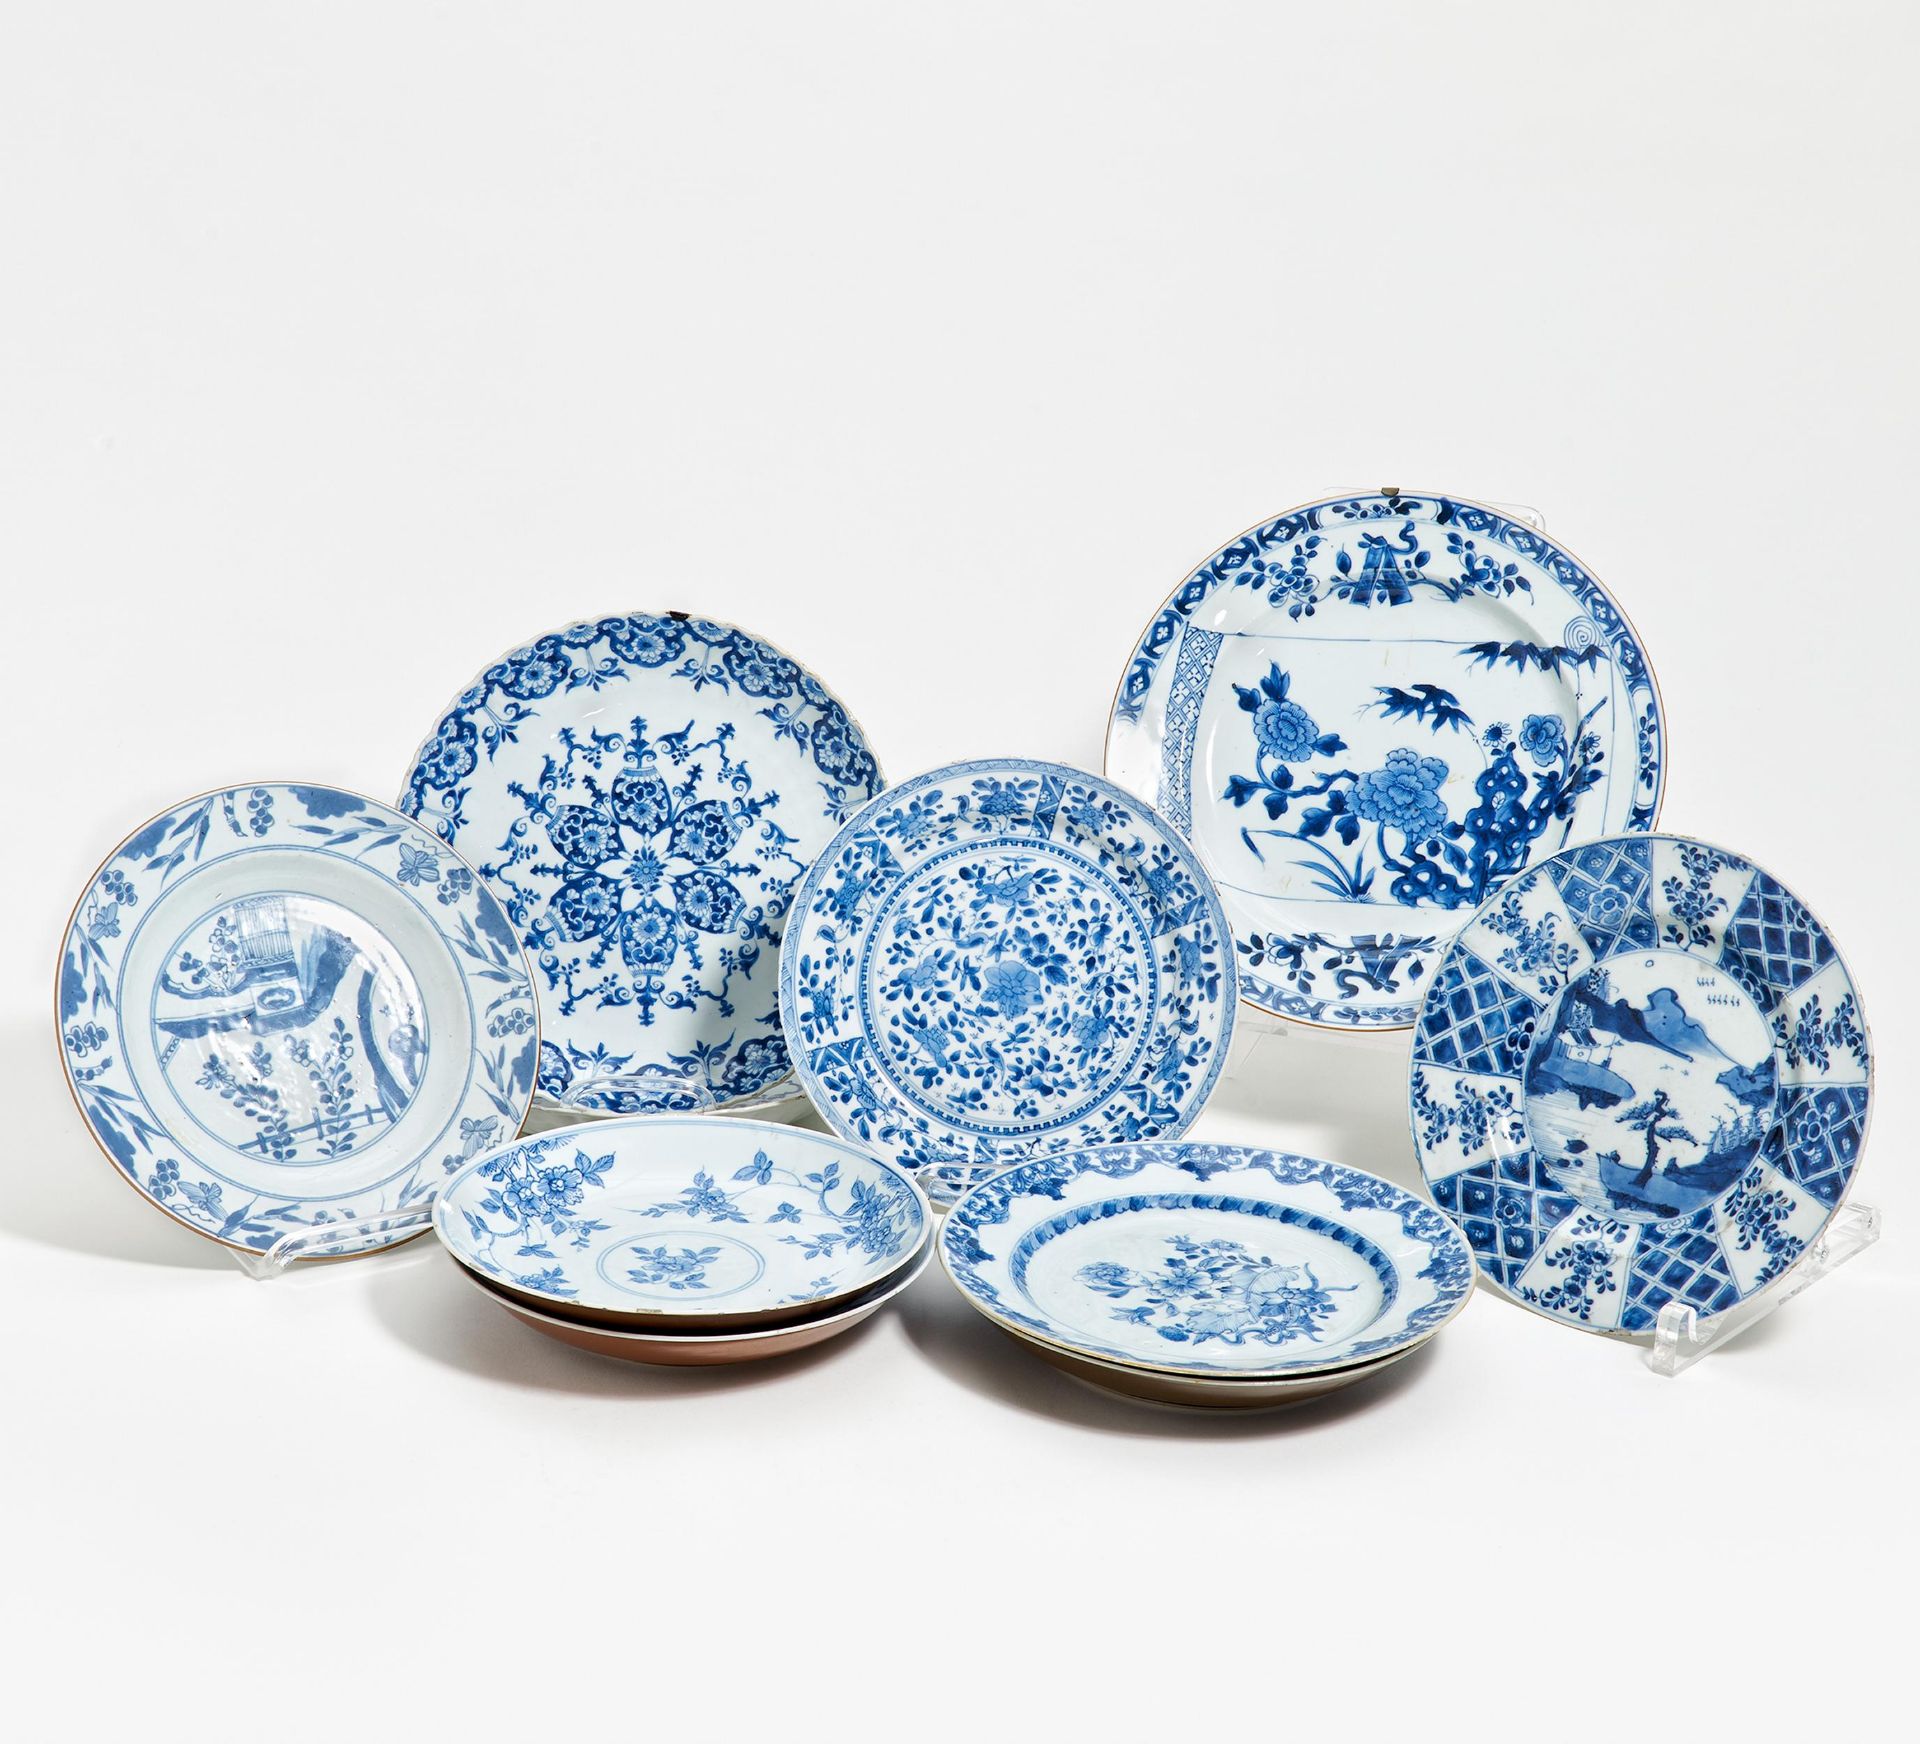 TEN DISHES WITH BLOWERS AND LANDSCAPE. China. Qing dynasty. 18th c. Porcelain in underglaze blue and